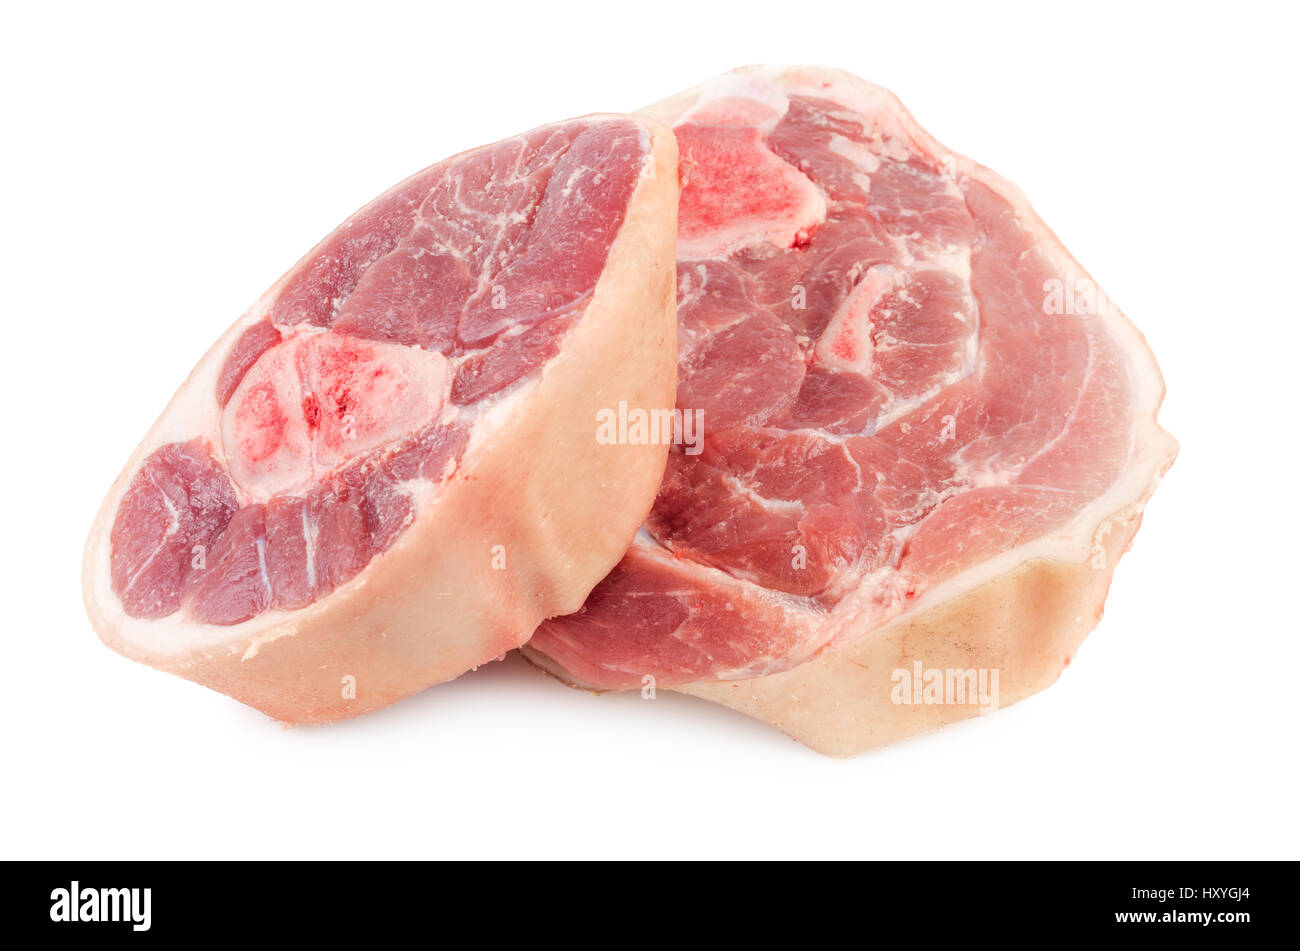 Slices of raw pork knuckle isolated on white background Stock Photo